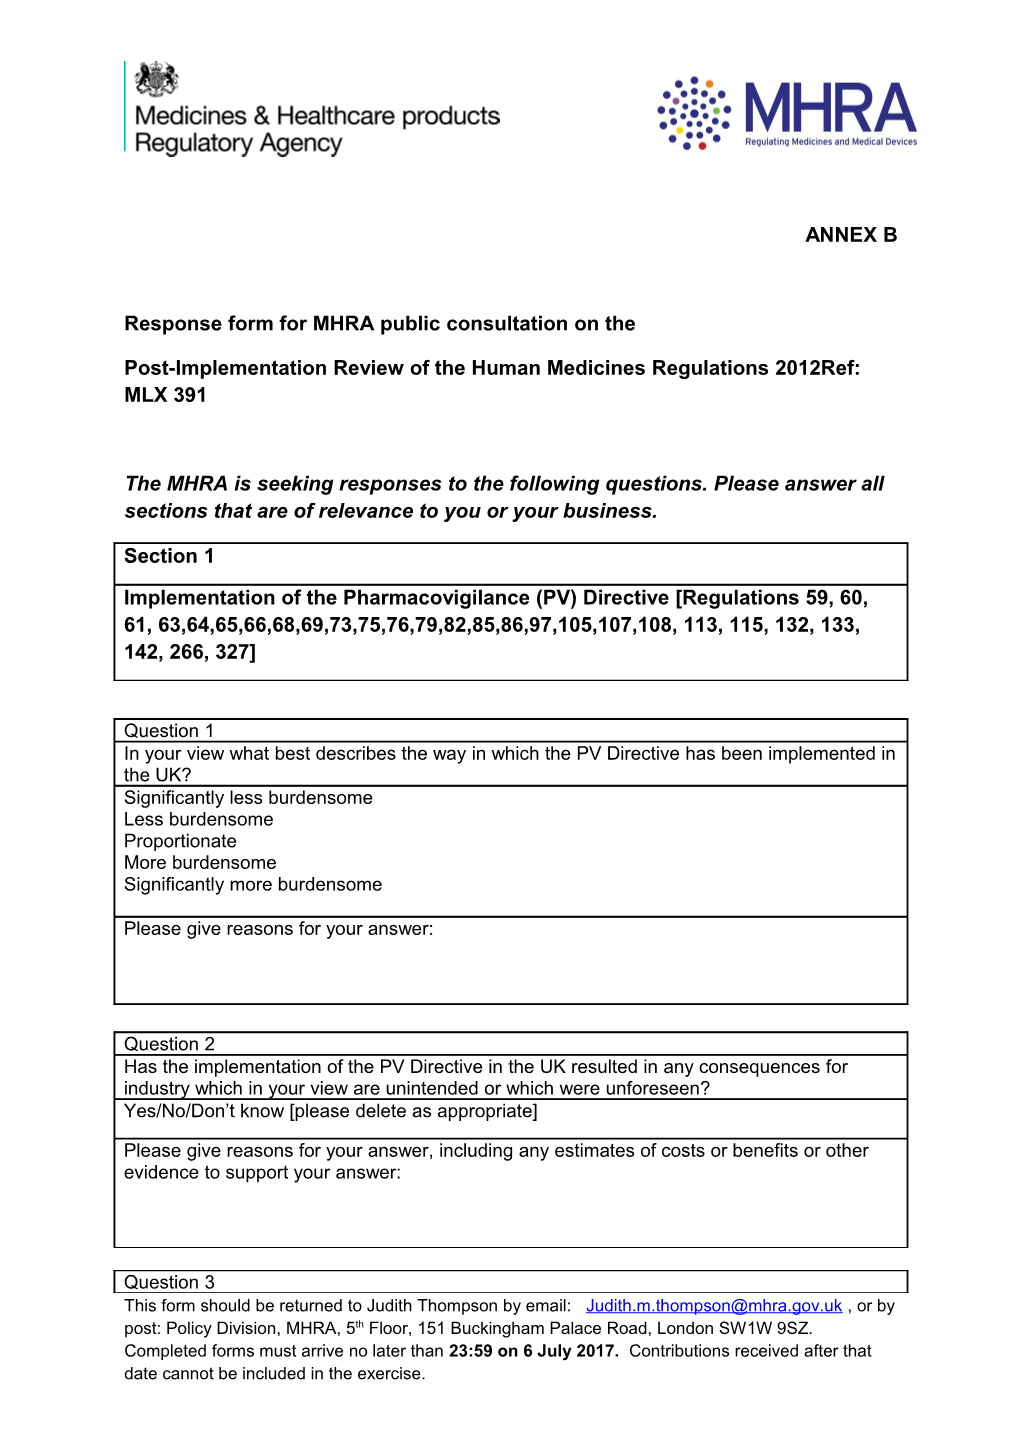 Response Form for MHRA Public Consultation on The